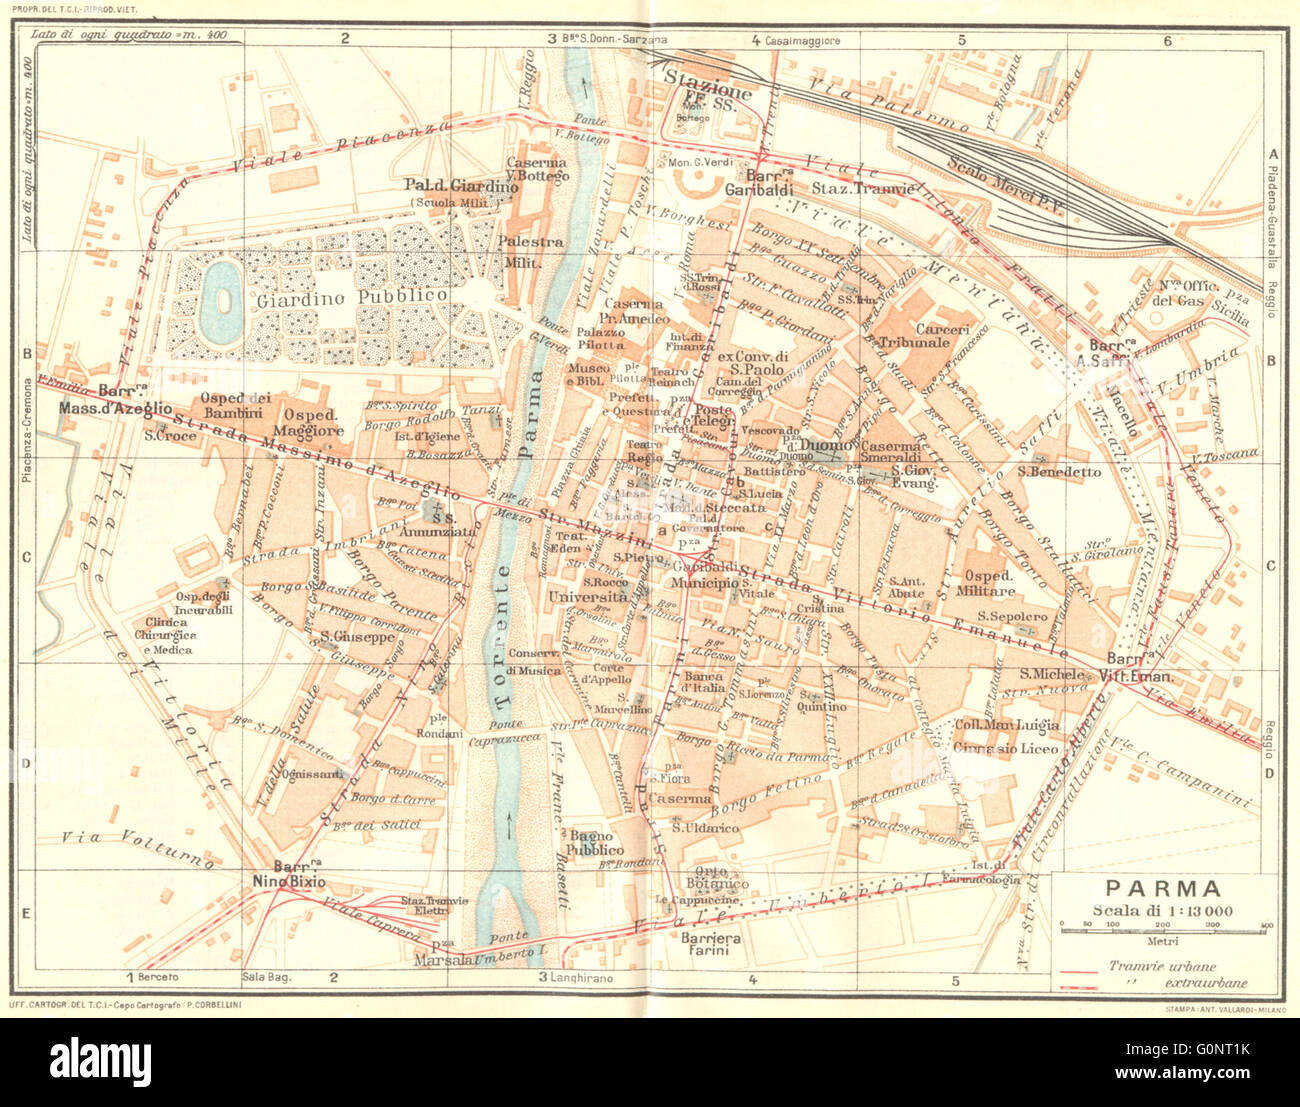 Parma Map High Resolution Stock Photography and Images - Alamy